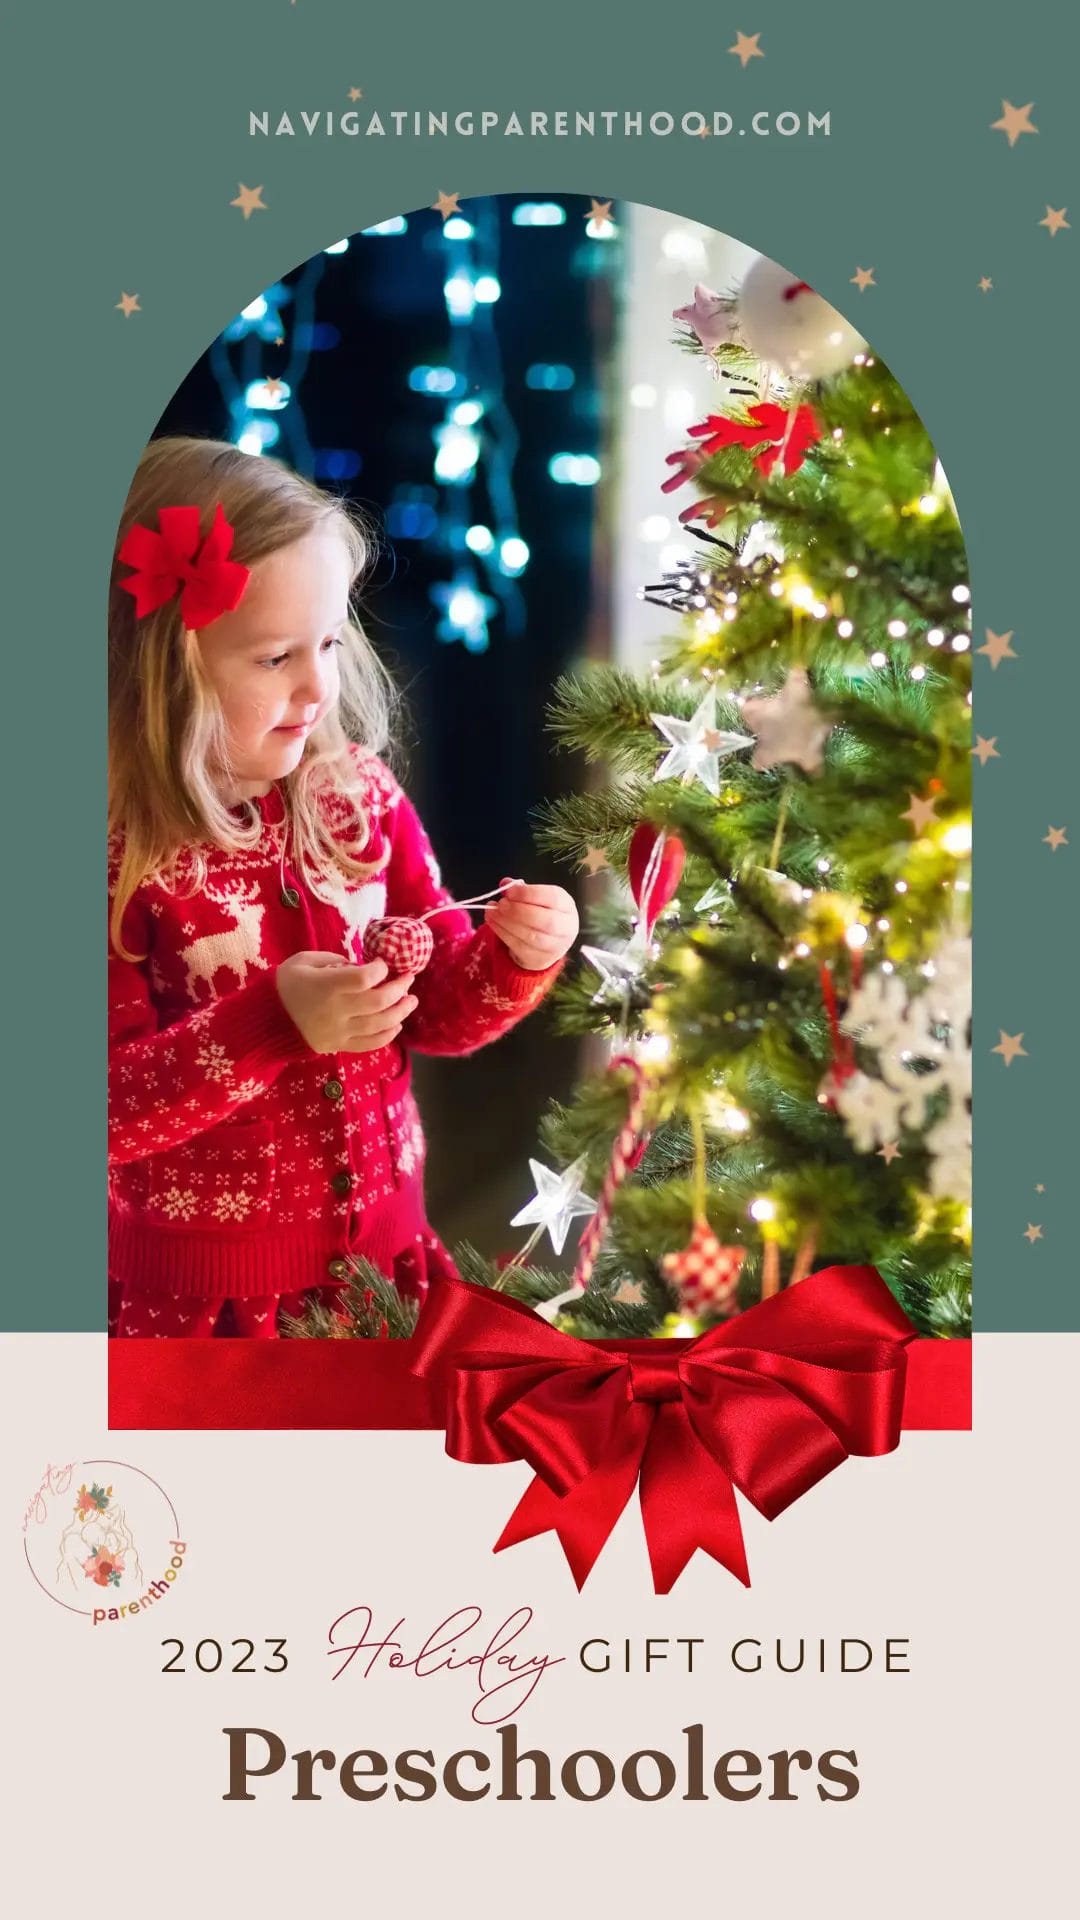 Gift Ideas To Keep Your Preschooler Engaged All Holiday Season